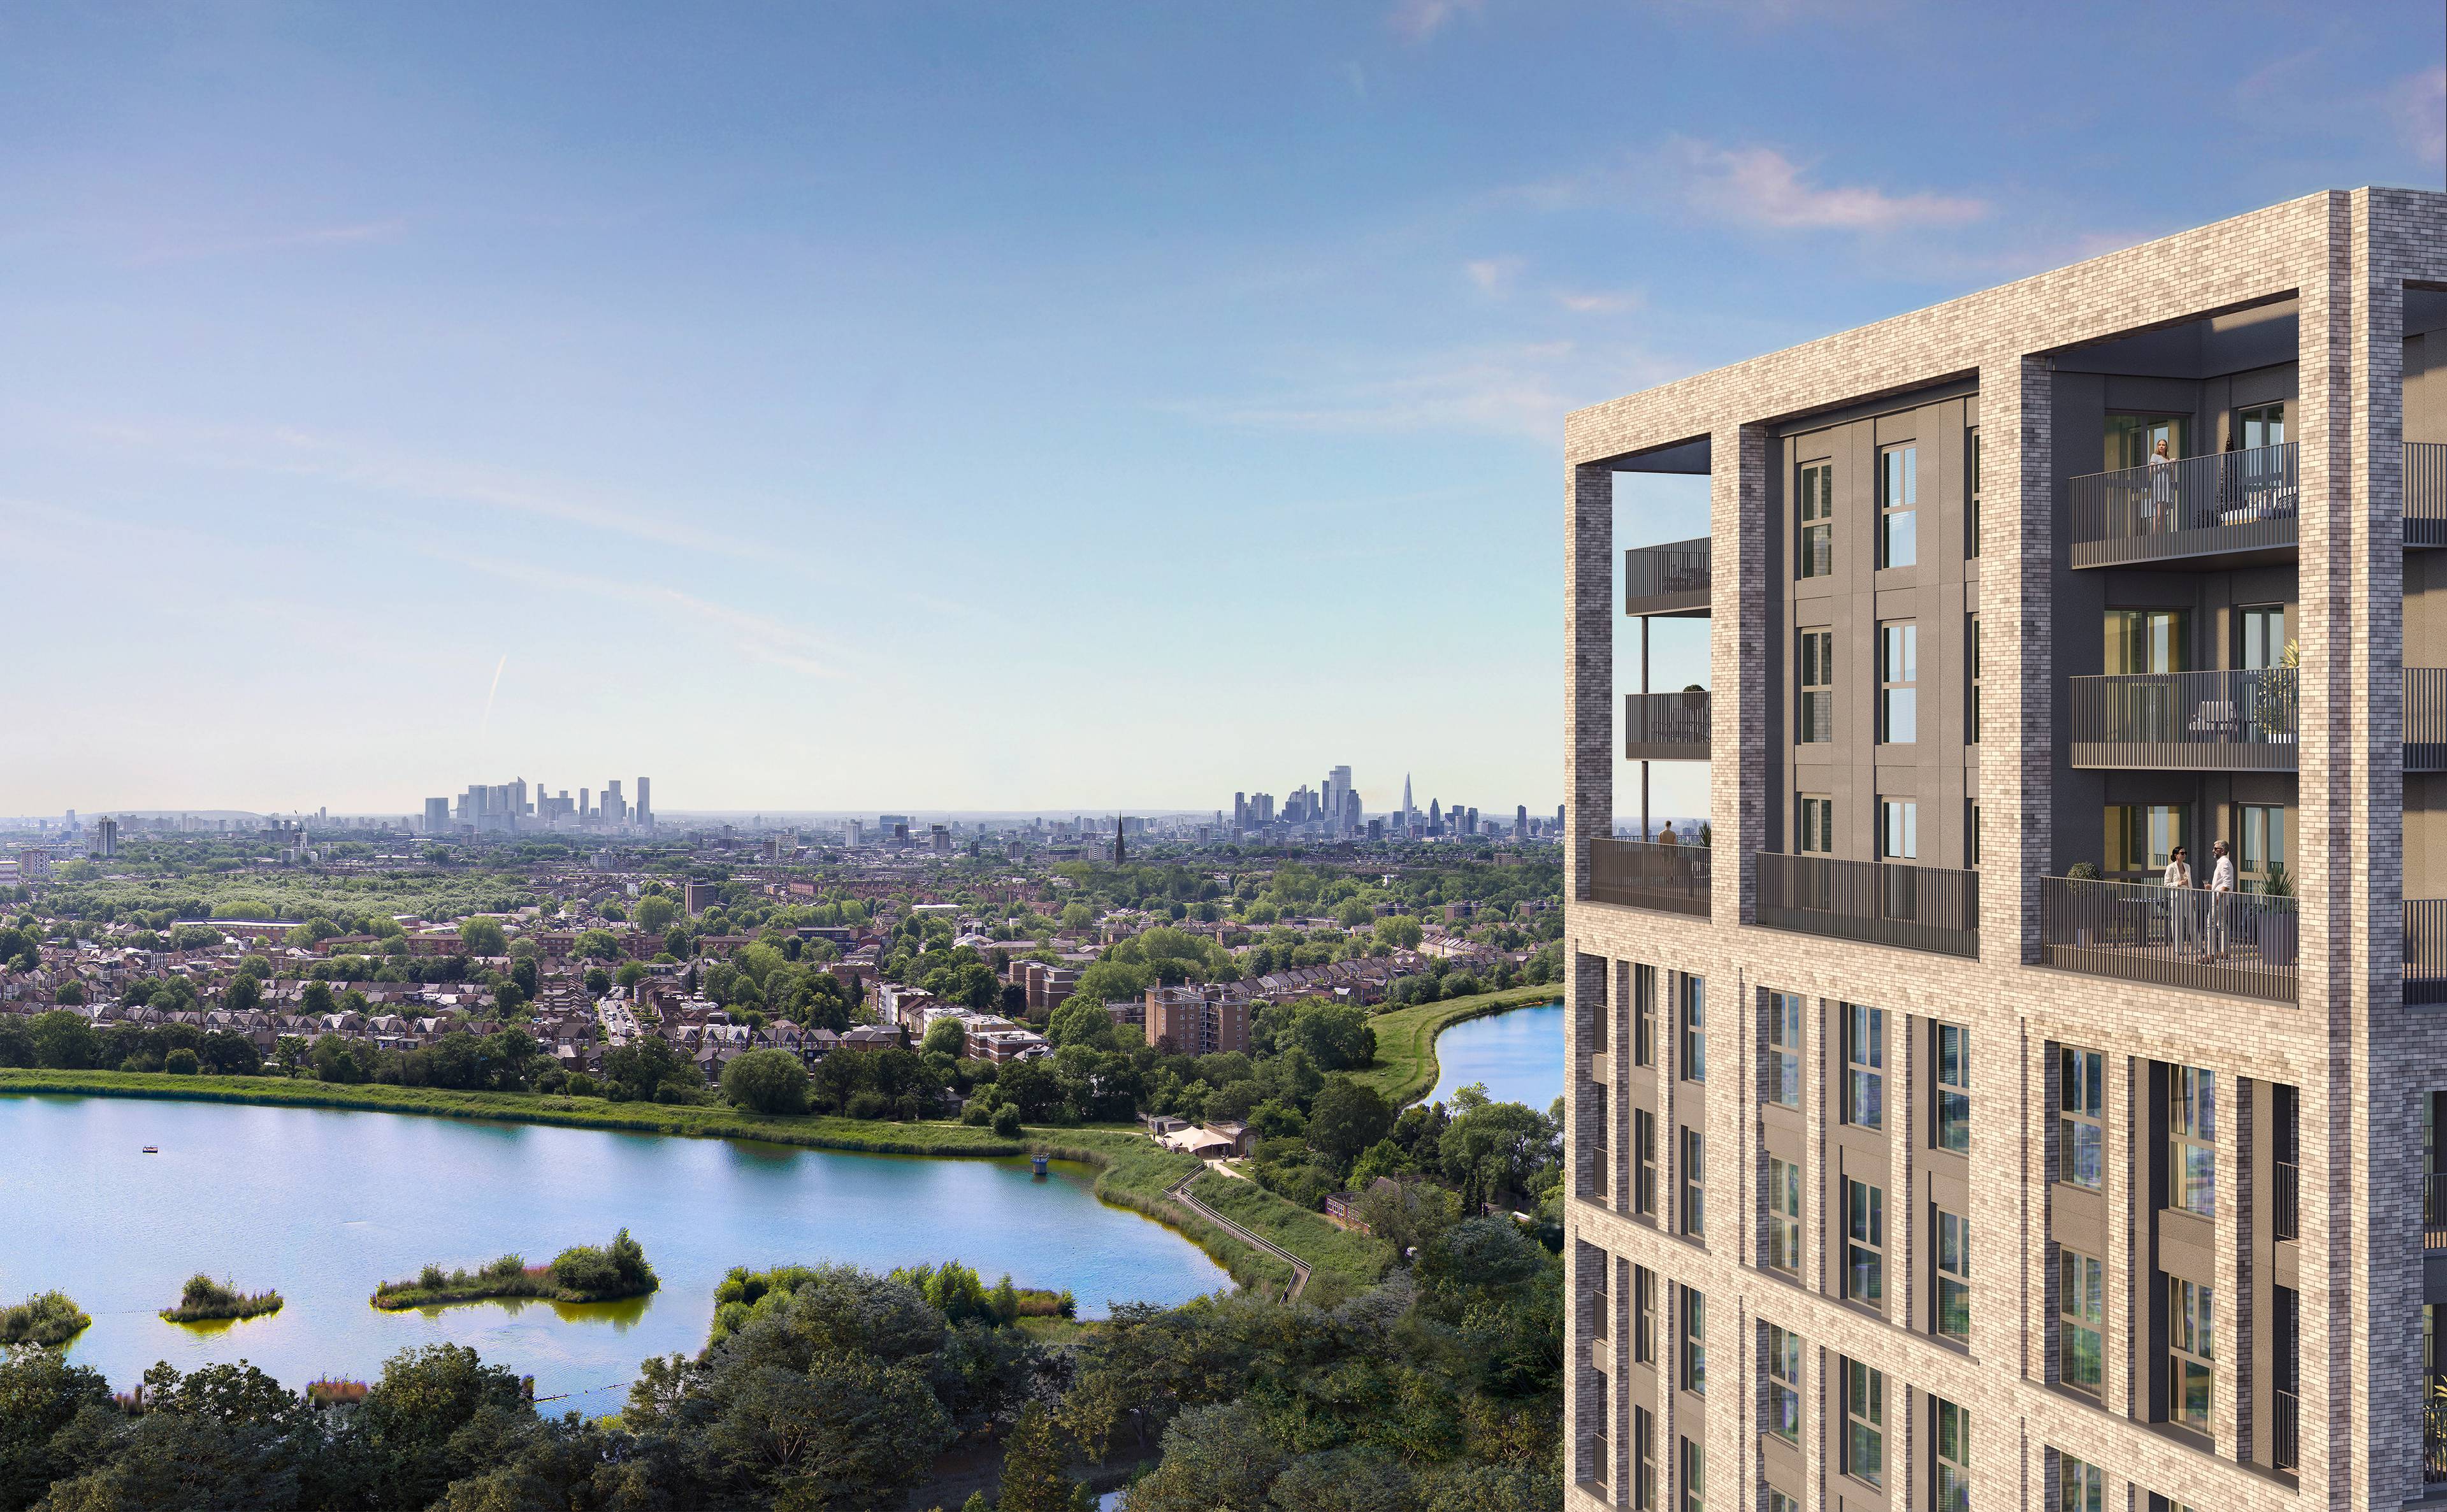 Hidden Oasis, 10 minutes from Central London -  Luxury 2-Bedroom Apartment in a Stunning New Development Surrounded by Nature - Fourteenth Floor - City Skyline & Alexandra Palace Views